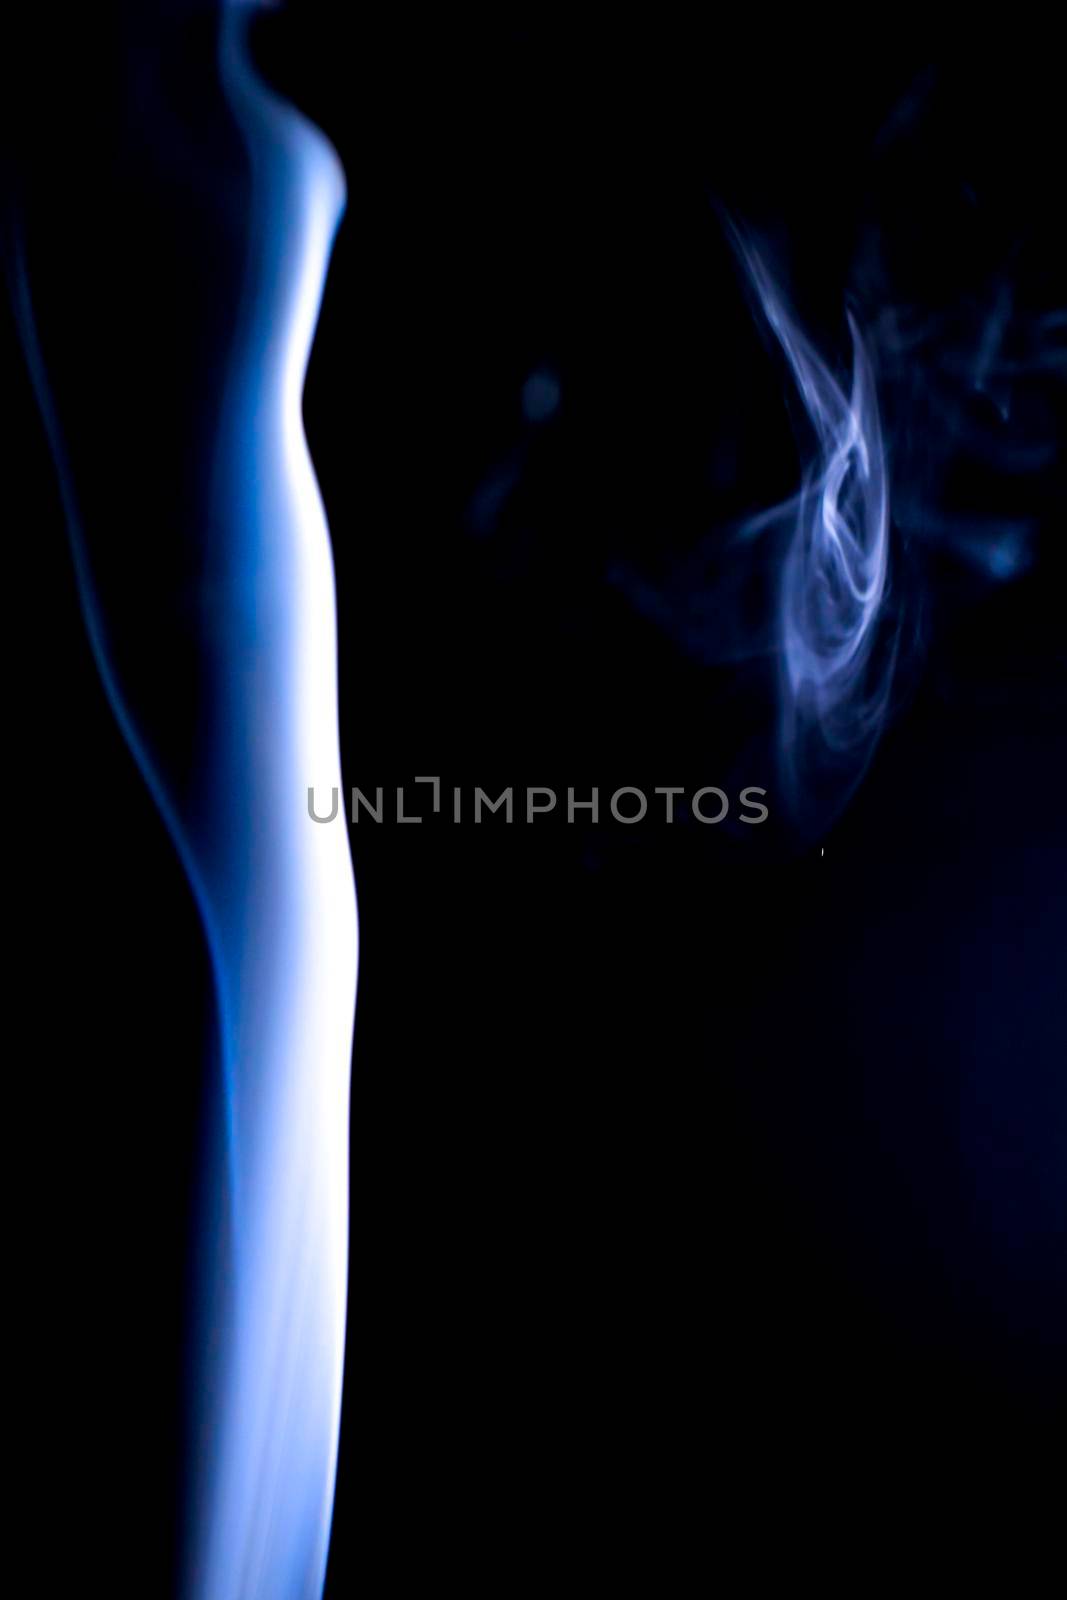 Incense cone shooting smoke on black background by soniabonet